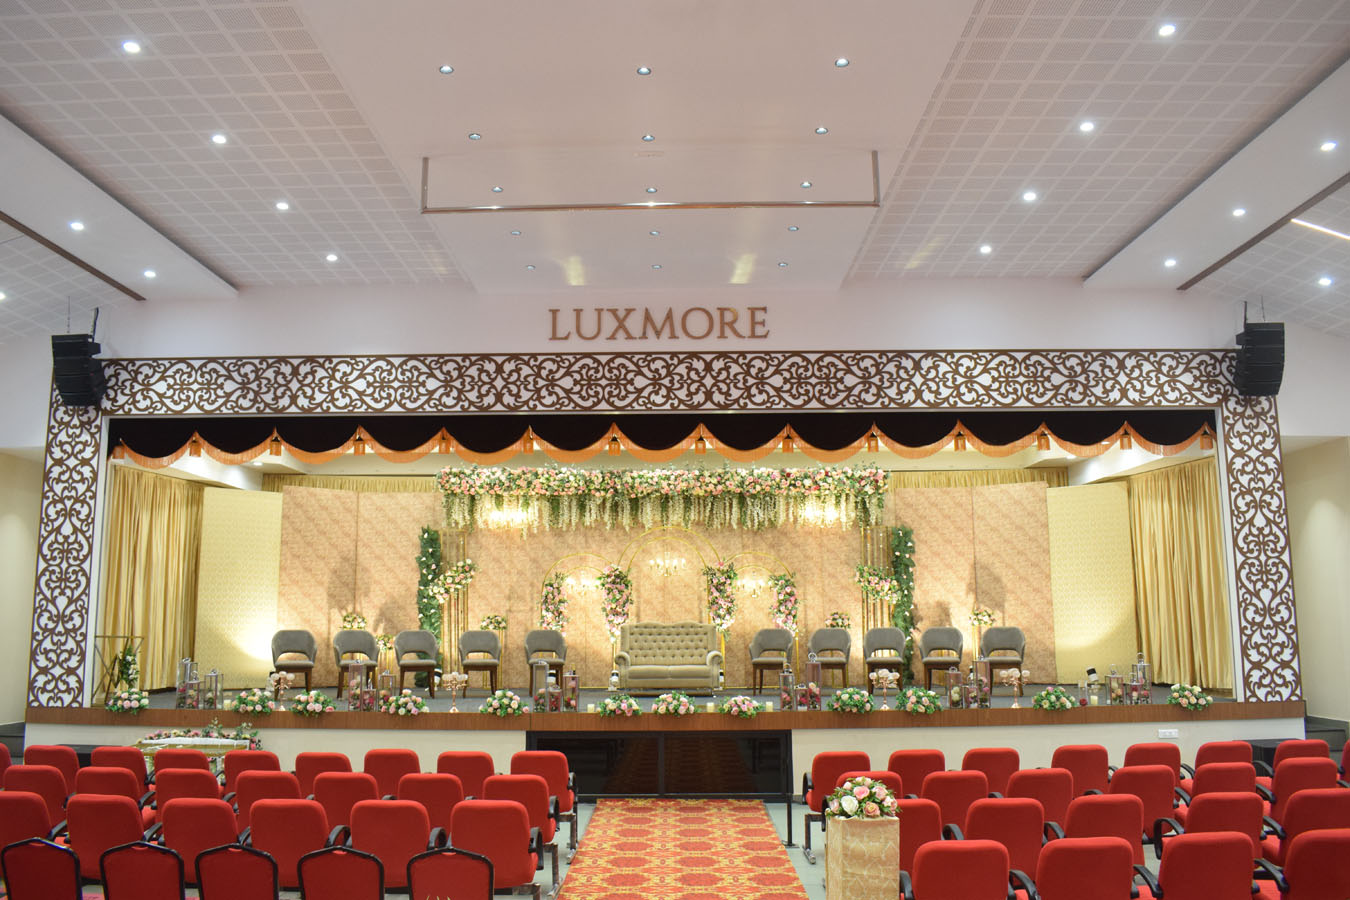 Luxmore stage - spacious and wide